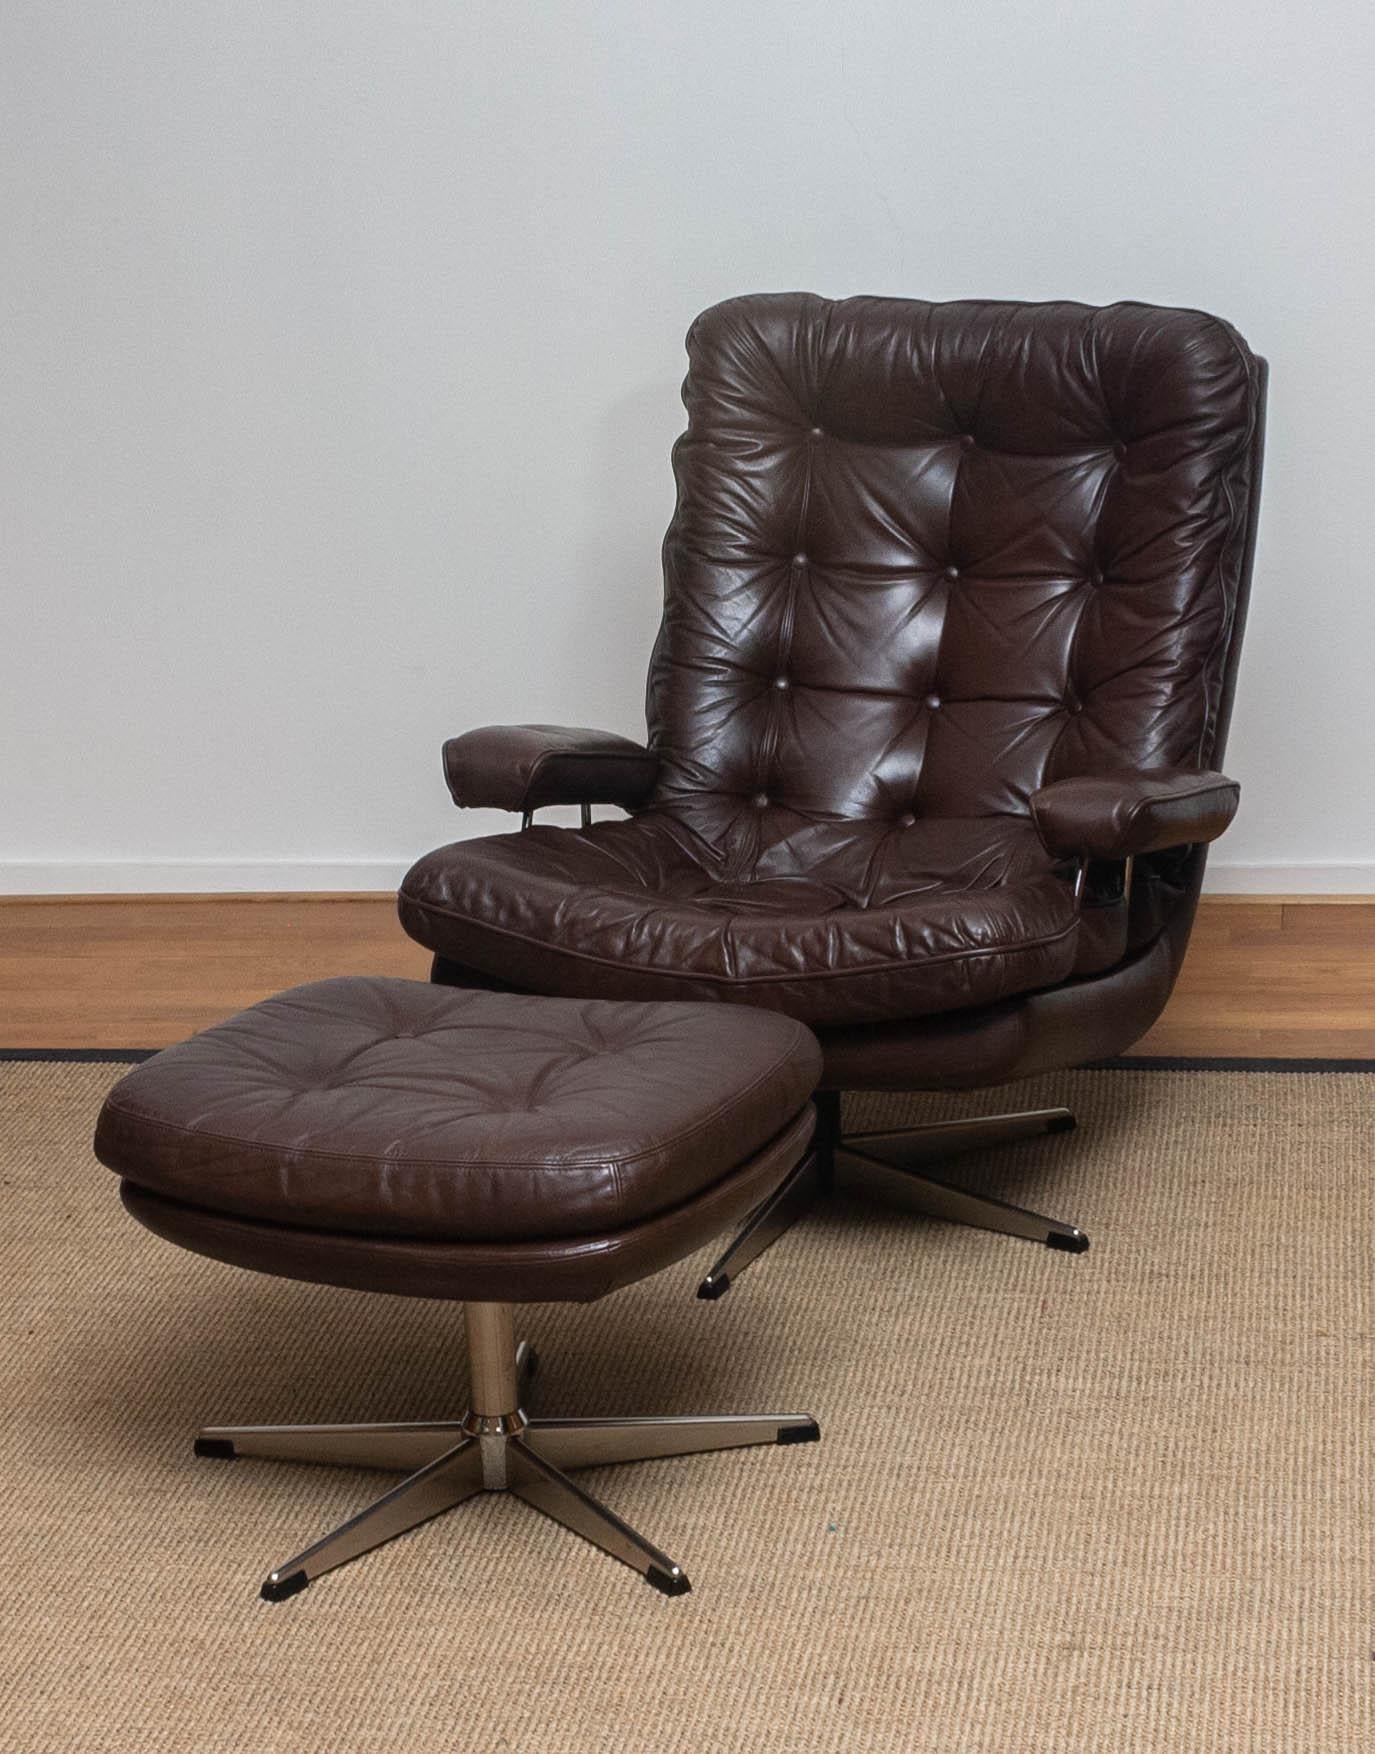 Late 20th Century 1970s, Brown Leather and Chrome Swivel Lounge Chair and Ottoman, Sweden